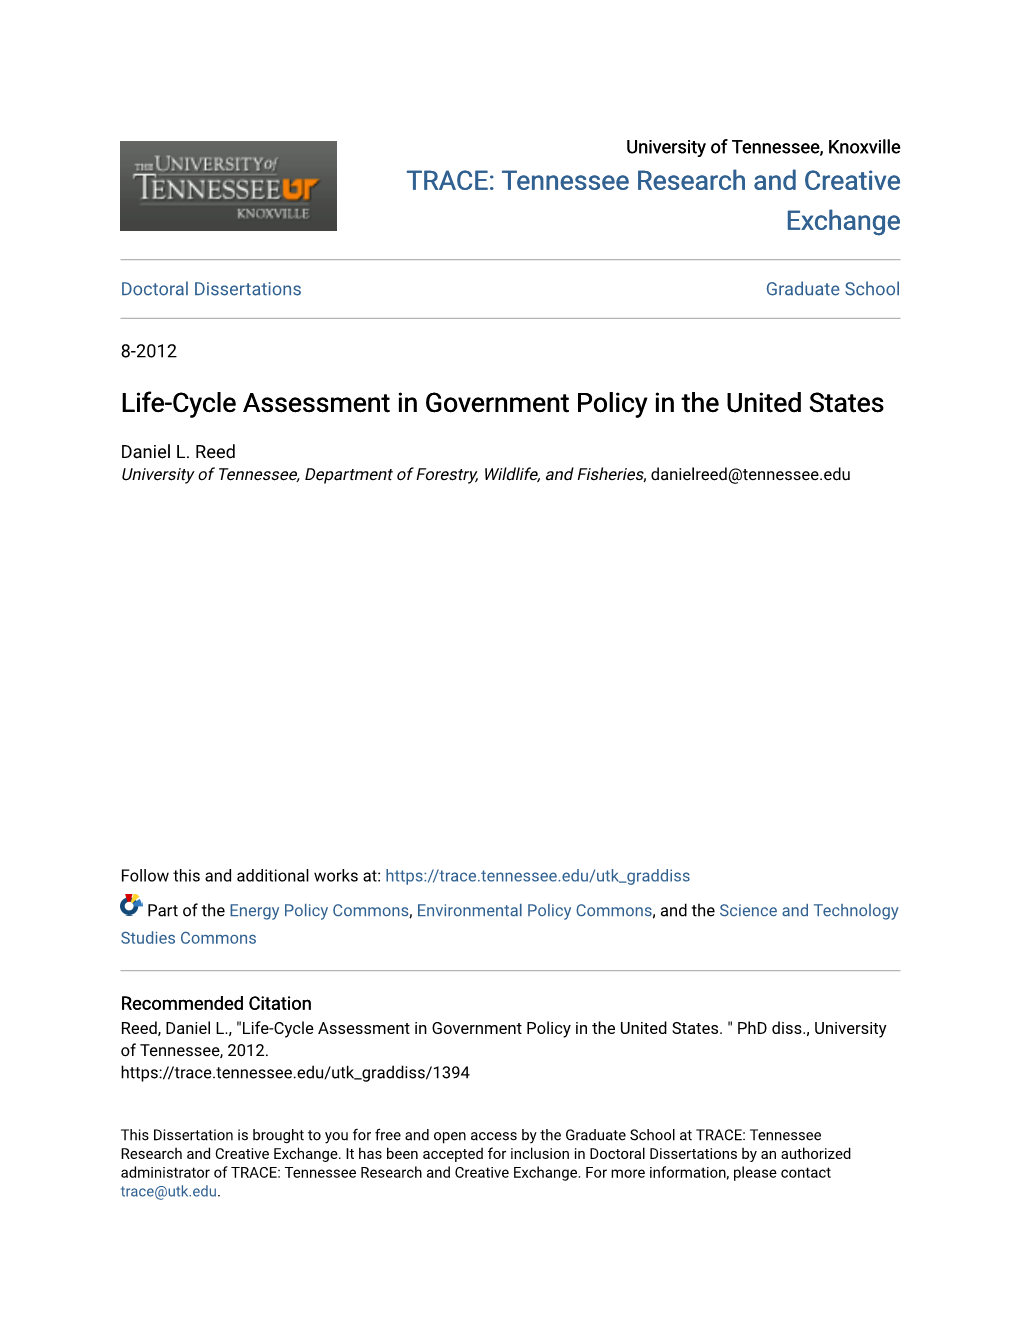 Life-Cycle Assessment in Government Policy in the United States